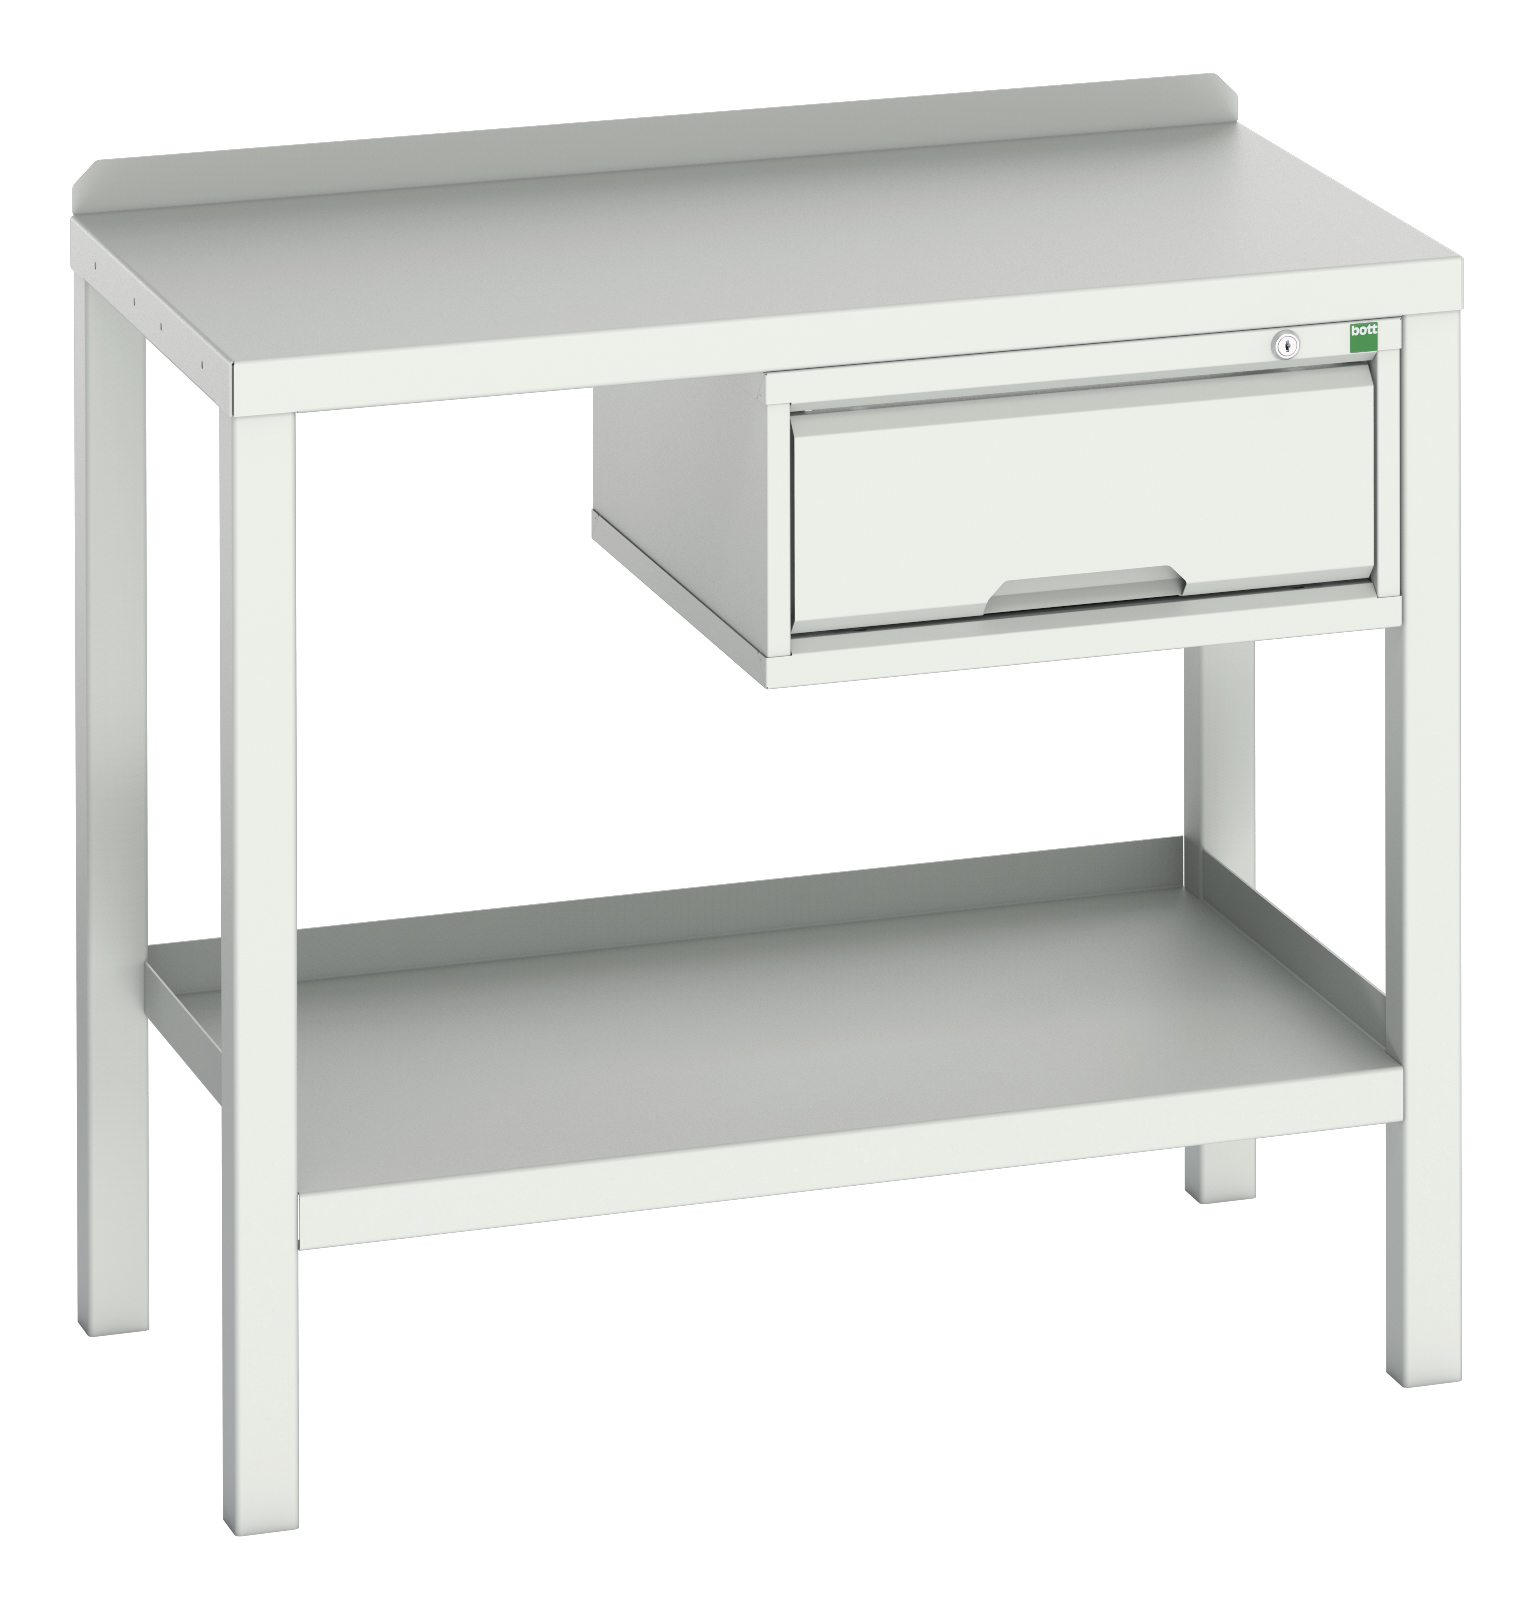 Bott Verso Welded Bench With 1 Drawer Cabinet - 16922600.16